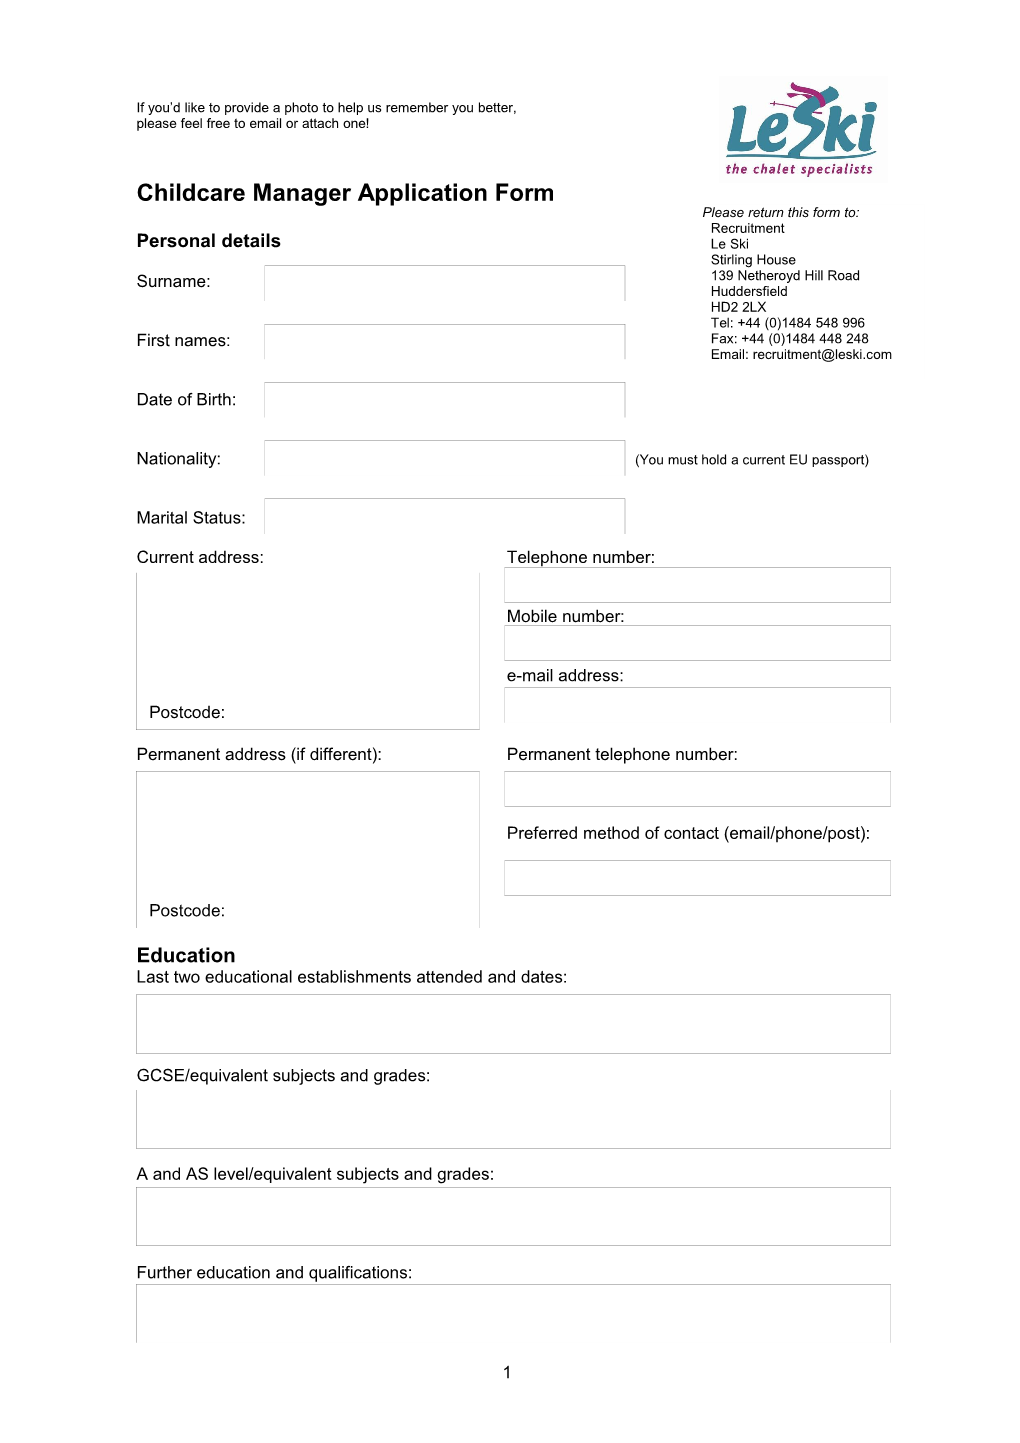 Childcare Manager Application Form